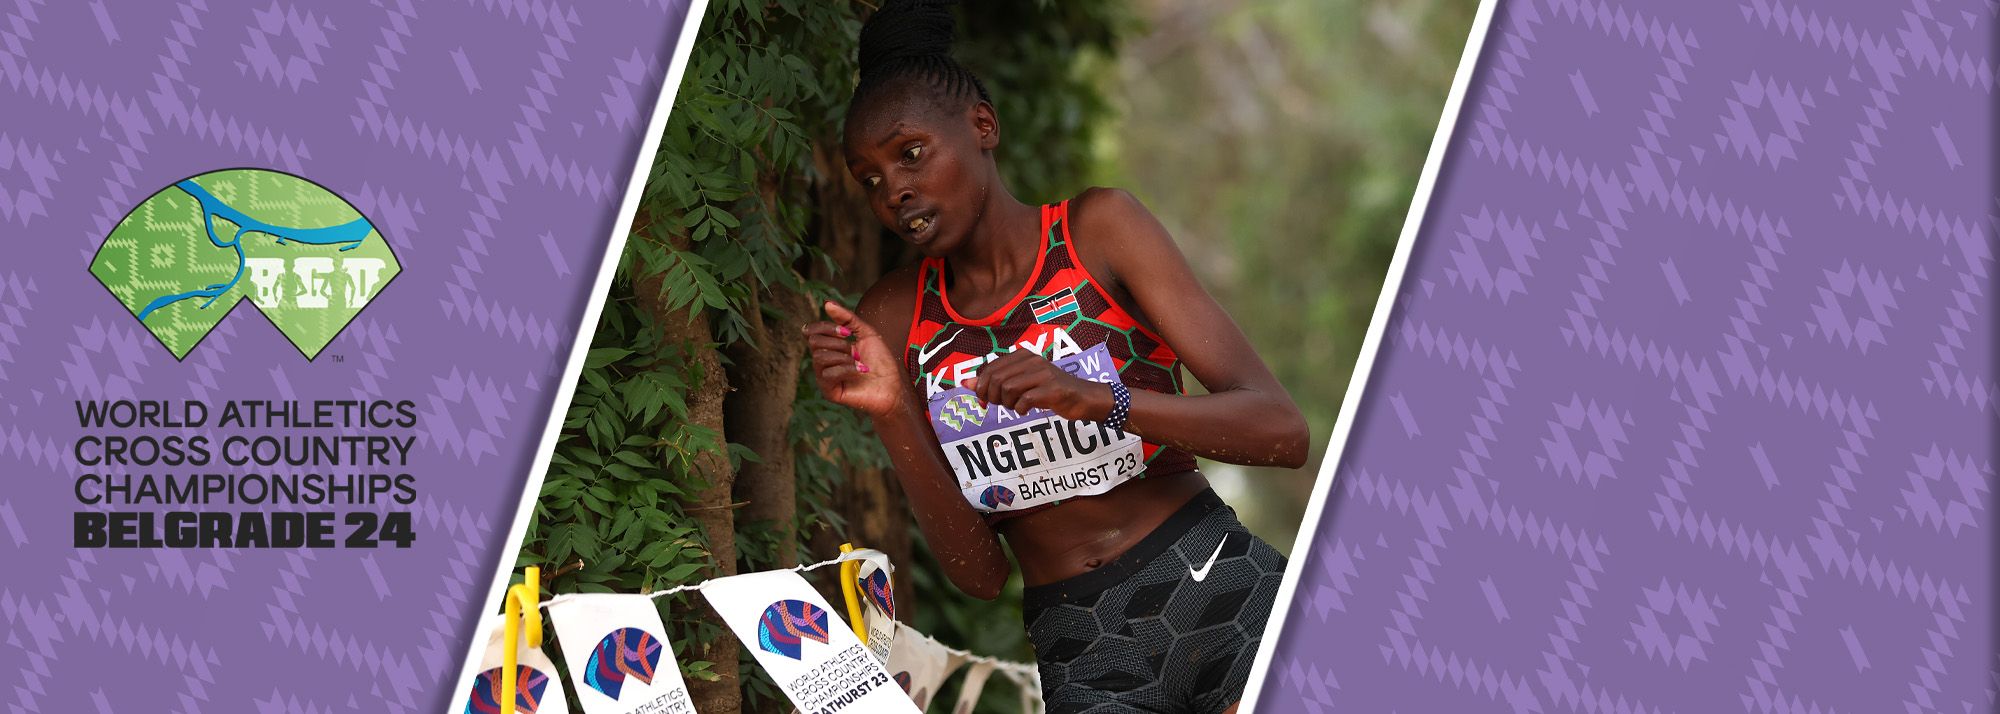 World 10km record-holder Agnes Ngetich will start as one of the favourites at the World Athletics Cross Country Championships Belgrade 24